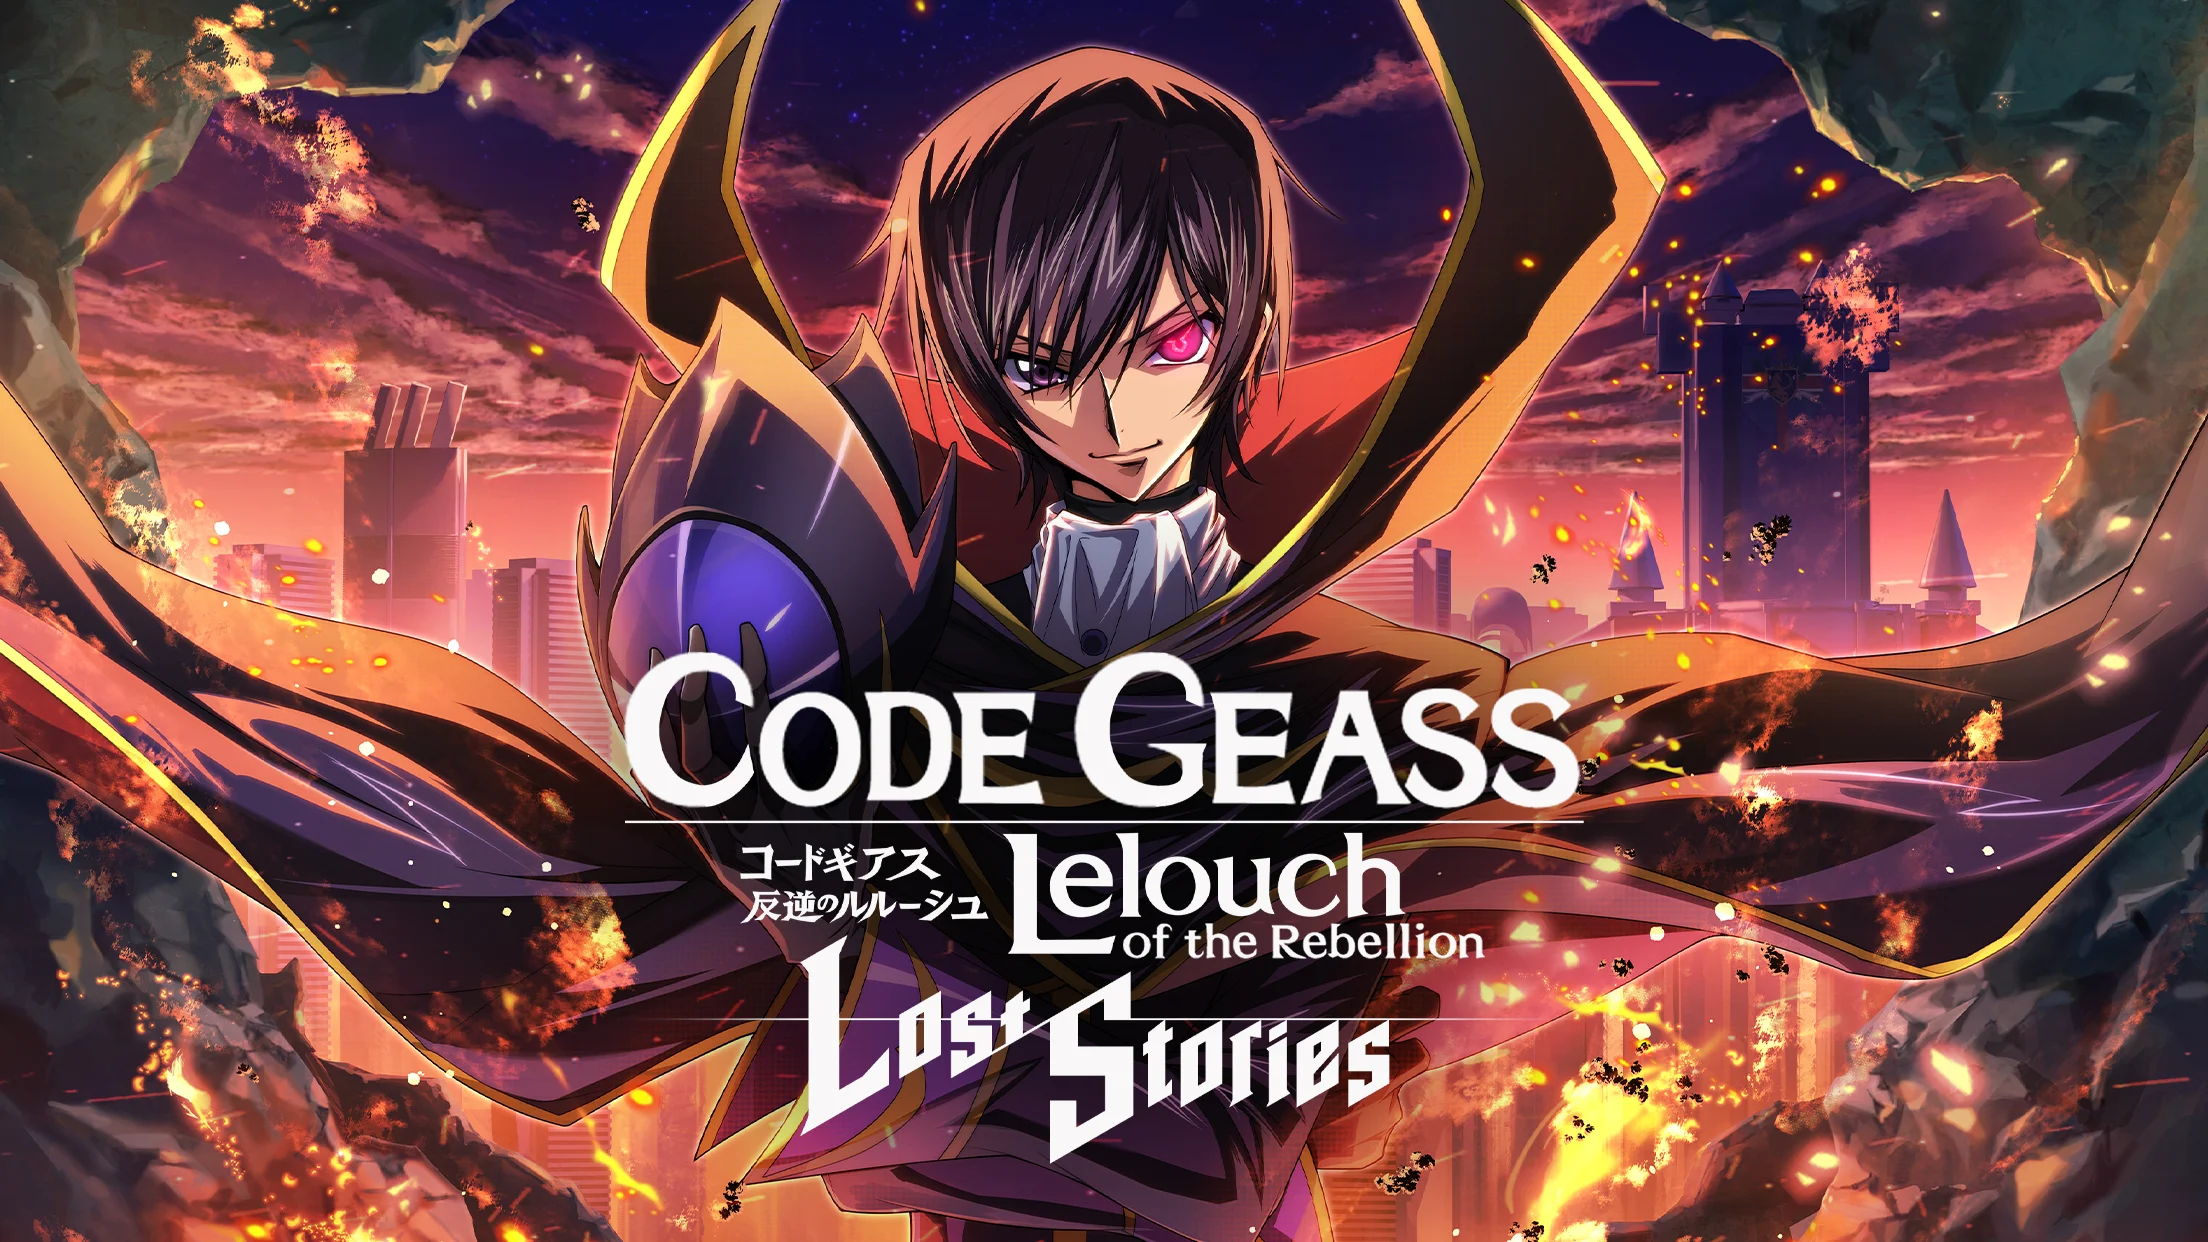 Code Geass: Lost Stories on PC